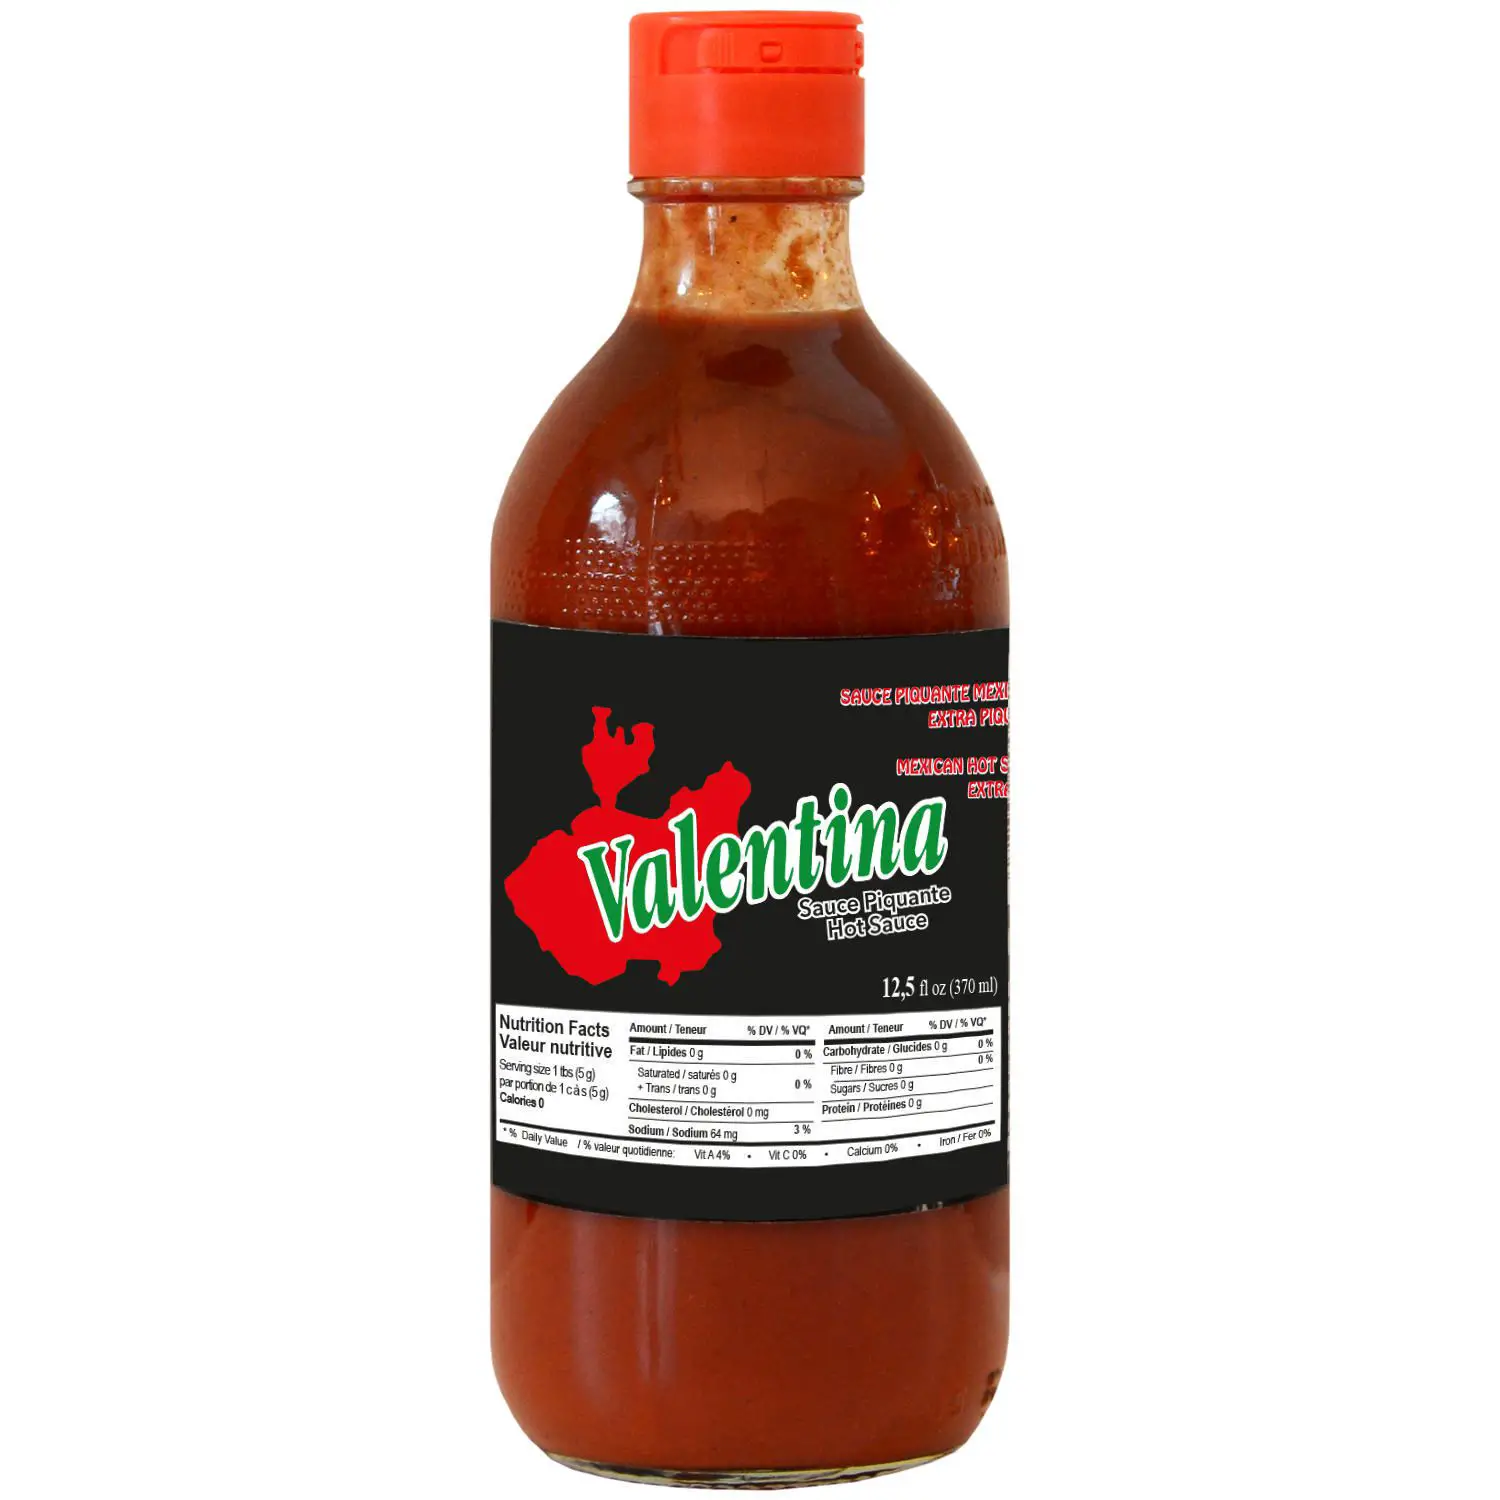 Where Can I Buy Valentina Hot Sauce In Canada